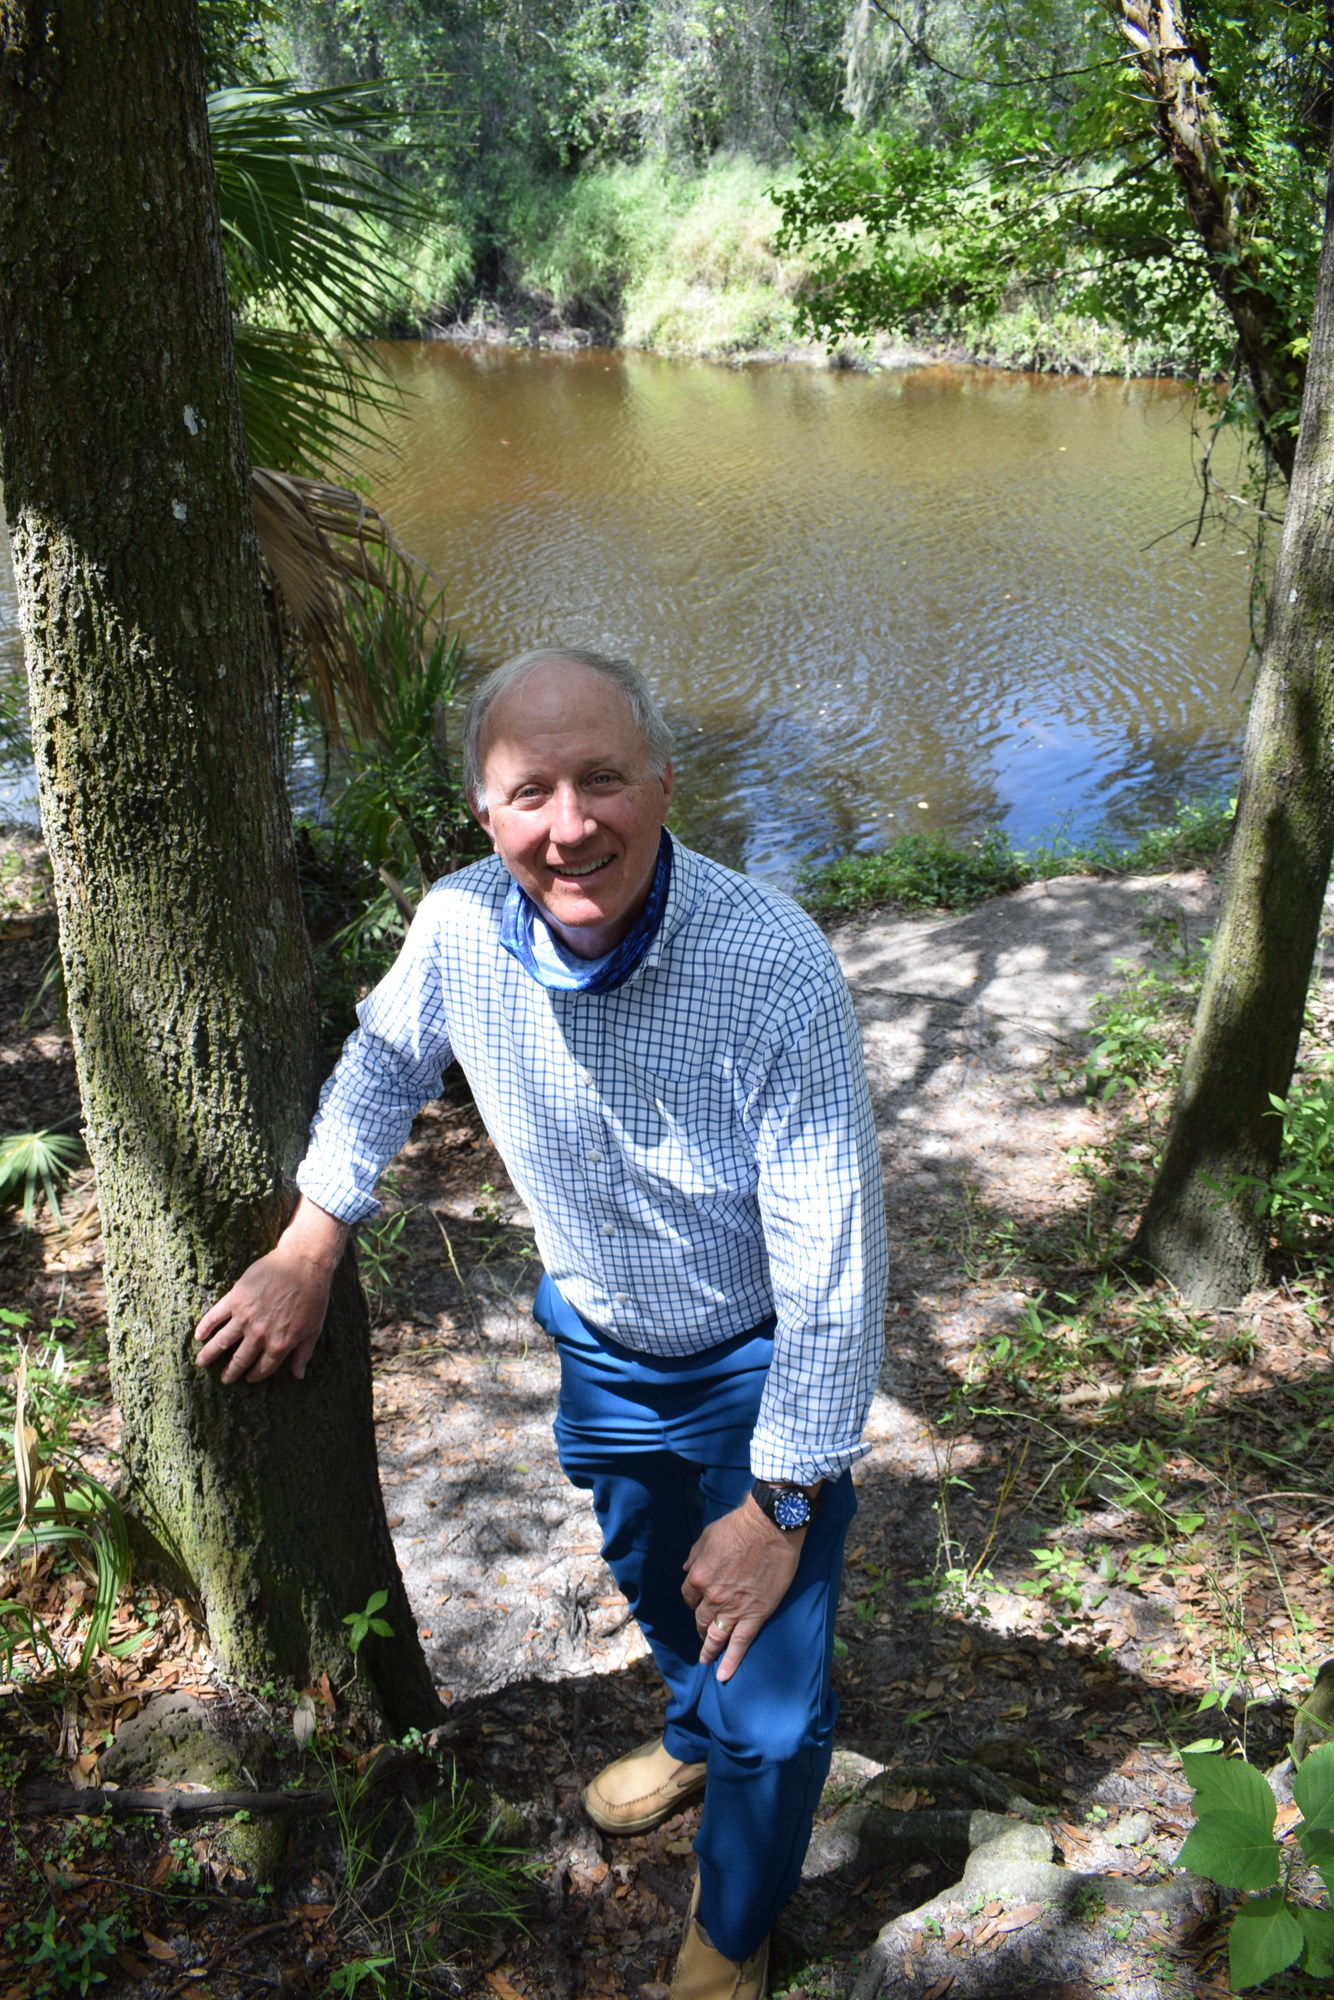 Hunsicker has been working for Manatee County since 1977.